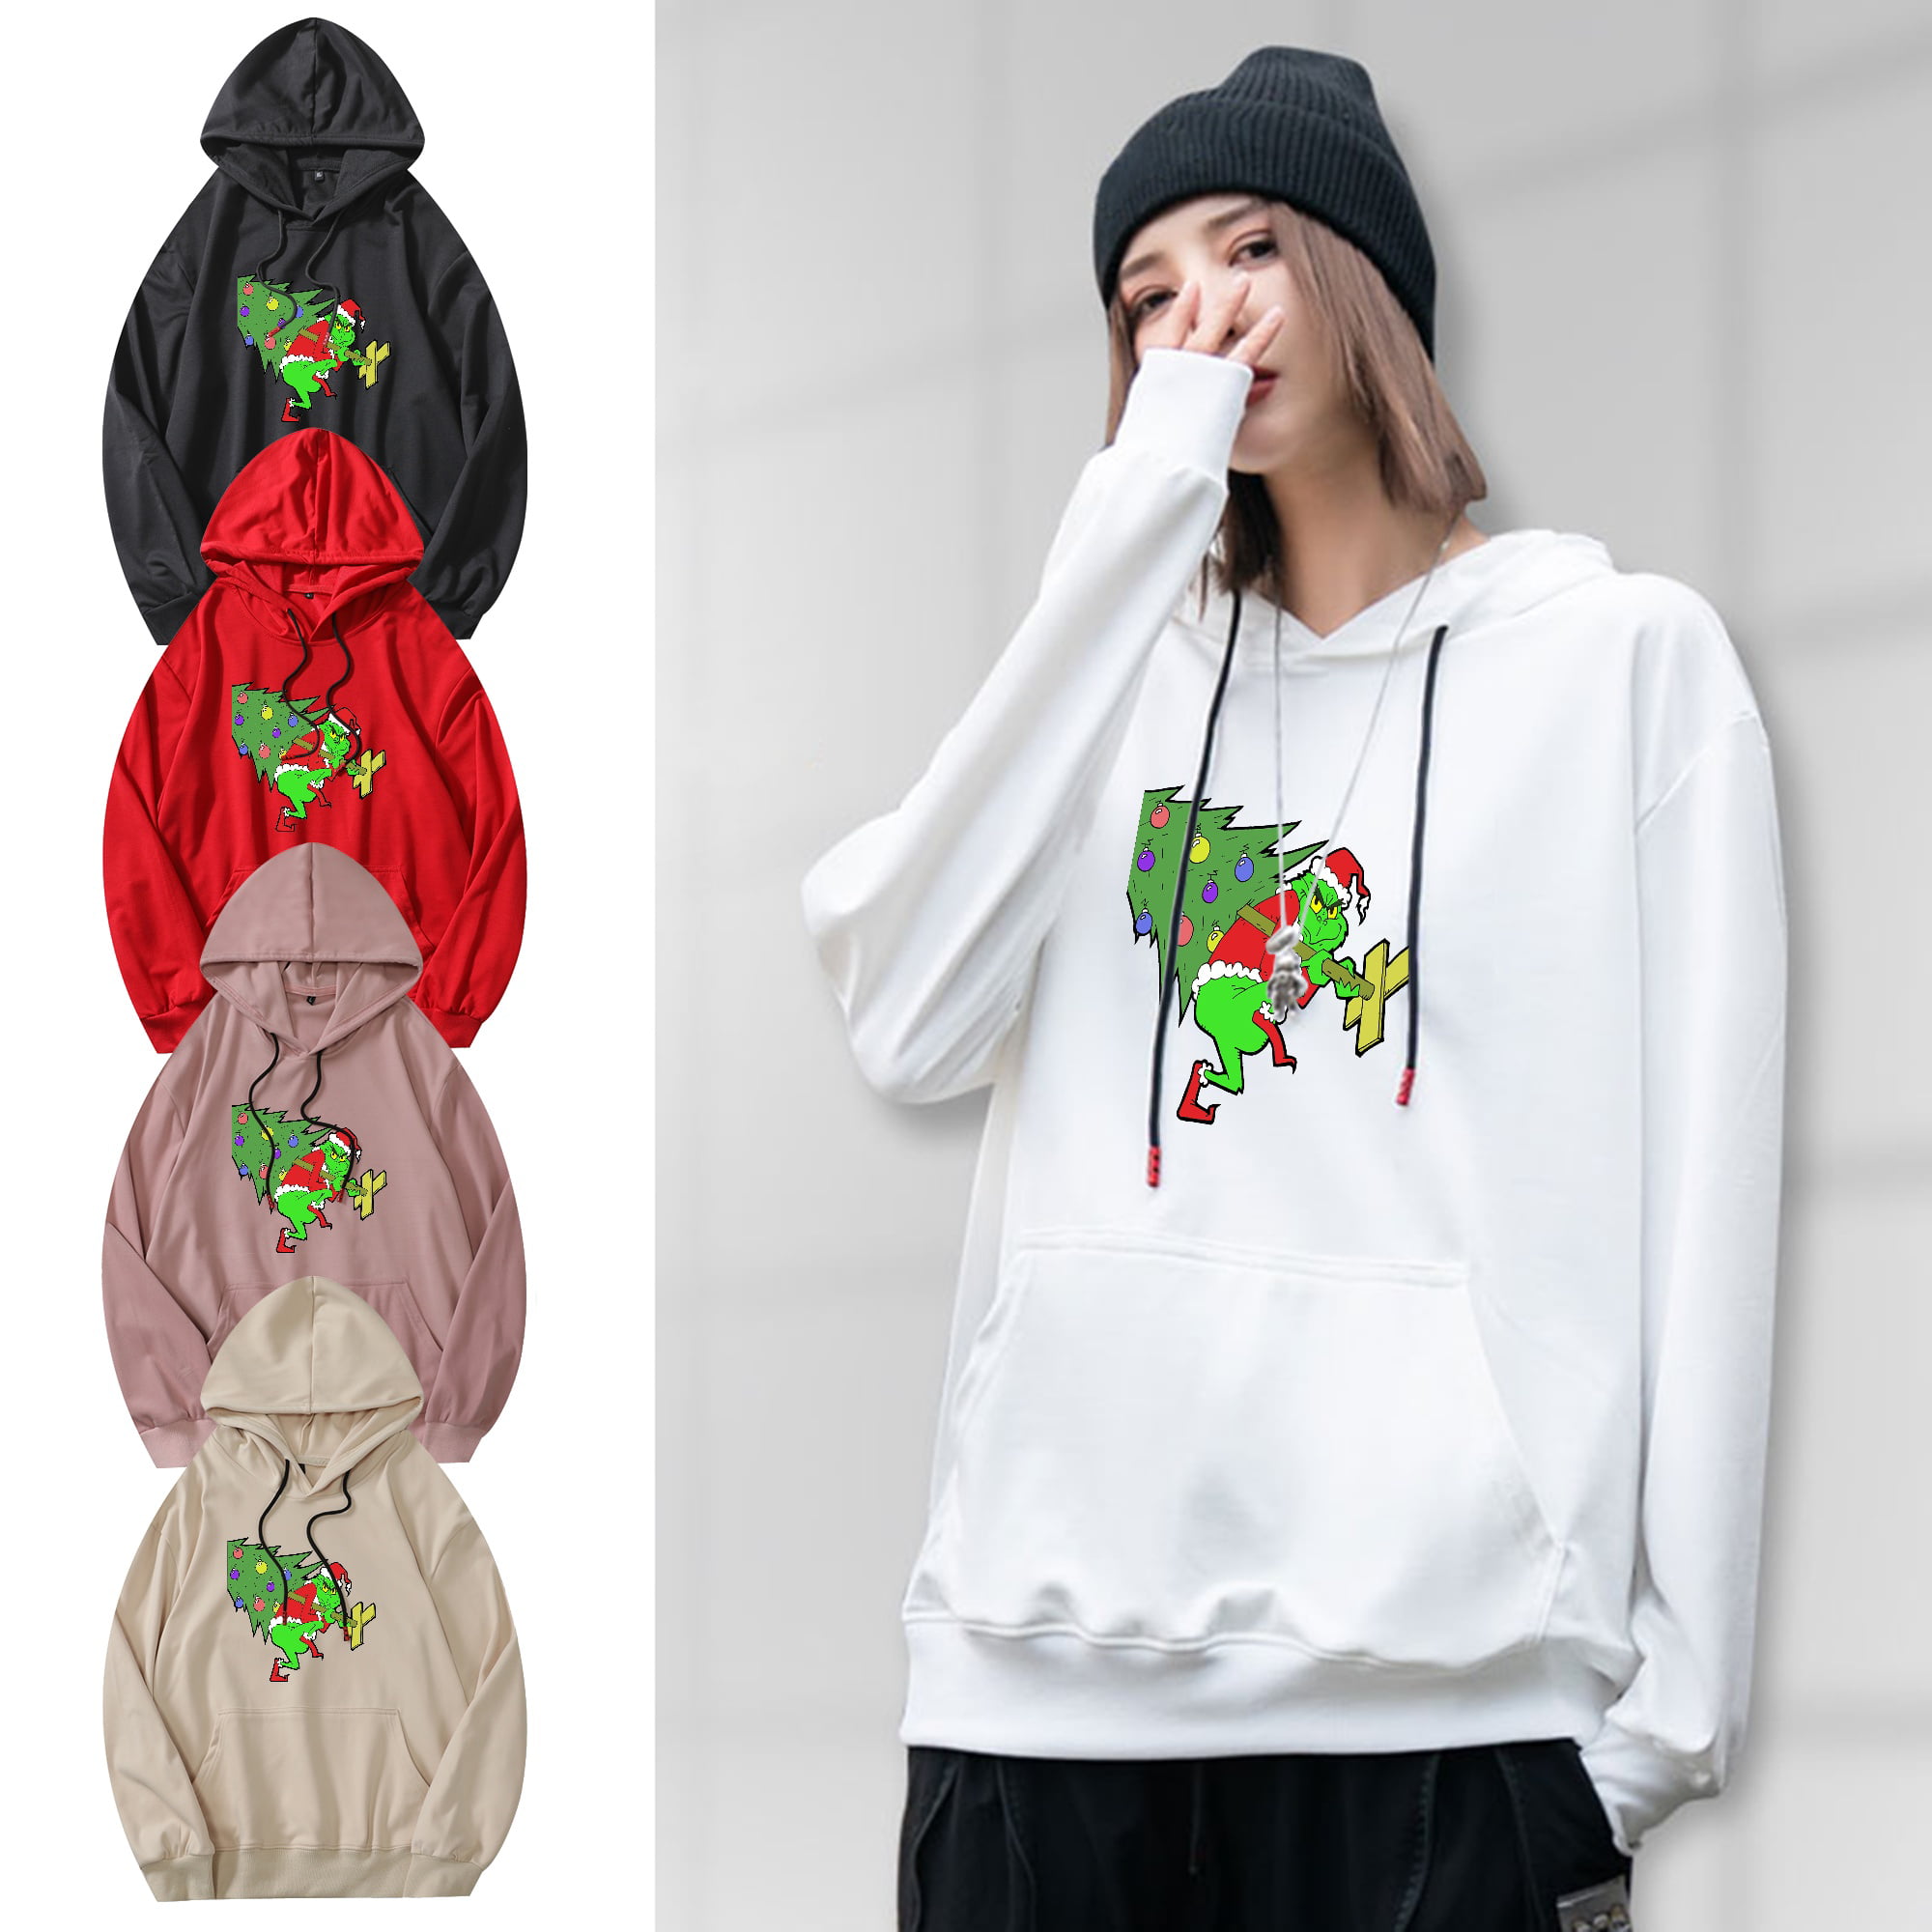 TONSEE 3D Christmas Print Hoodie Novelty Sweater for Mens Women Ladies Unisex Sweatshirt Pullover with Big Pocket